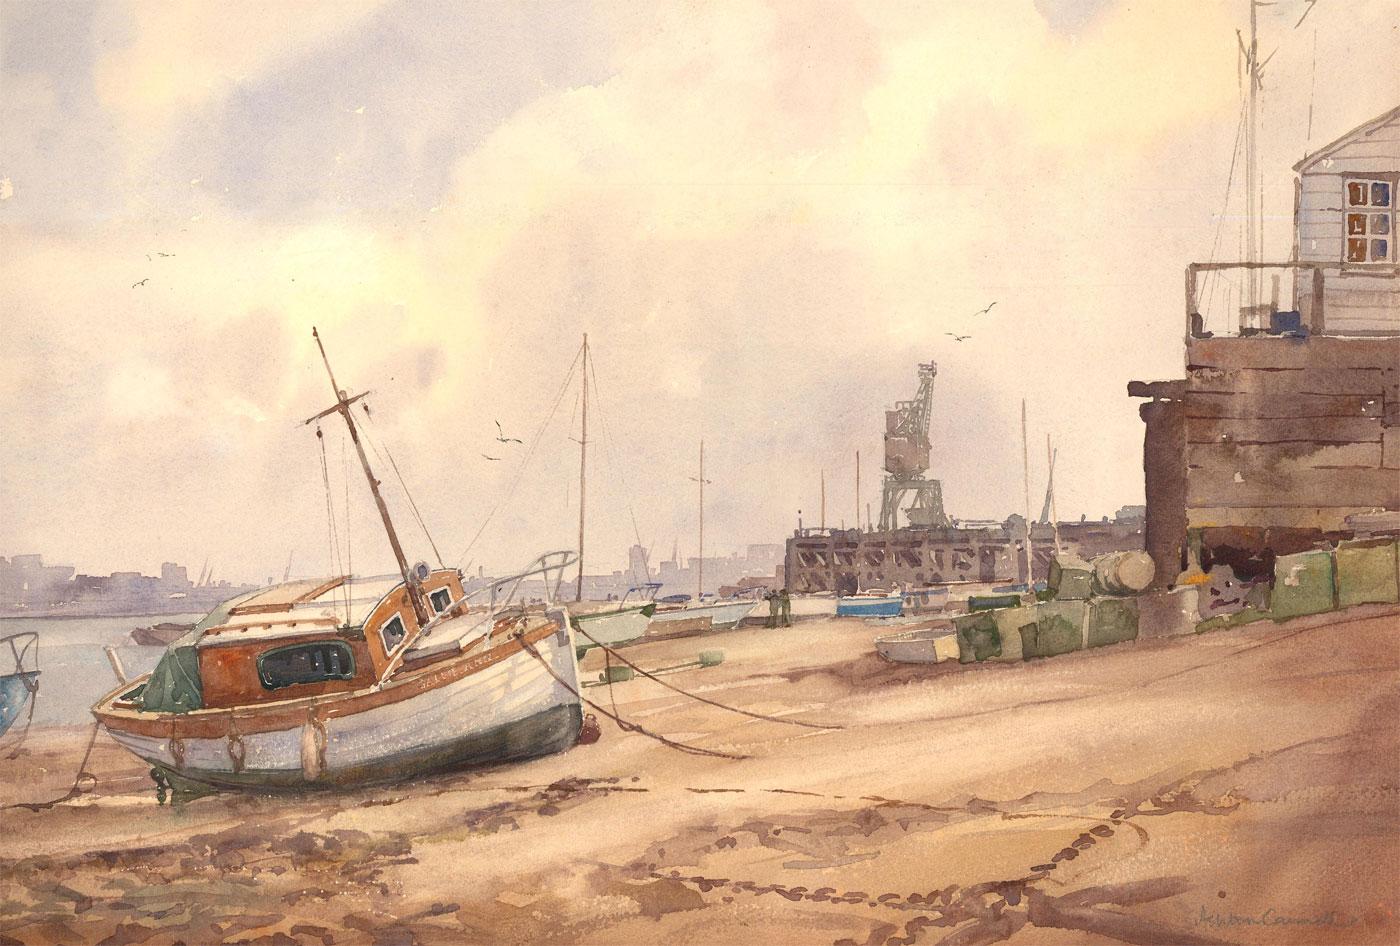 A fine watercolour study by artist Ashton Cannell, depicting a line of sailing boats tethered to the foreshore. Following the route of the river, a dockyard and crane stand tall above a distant city skyline. The watercolour has been signed in